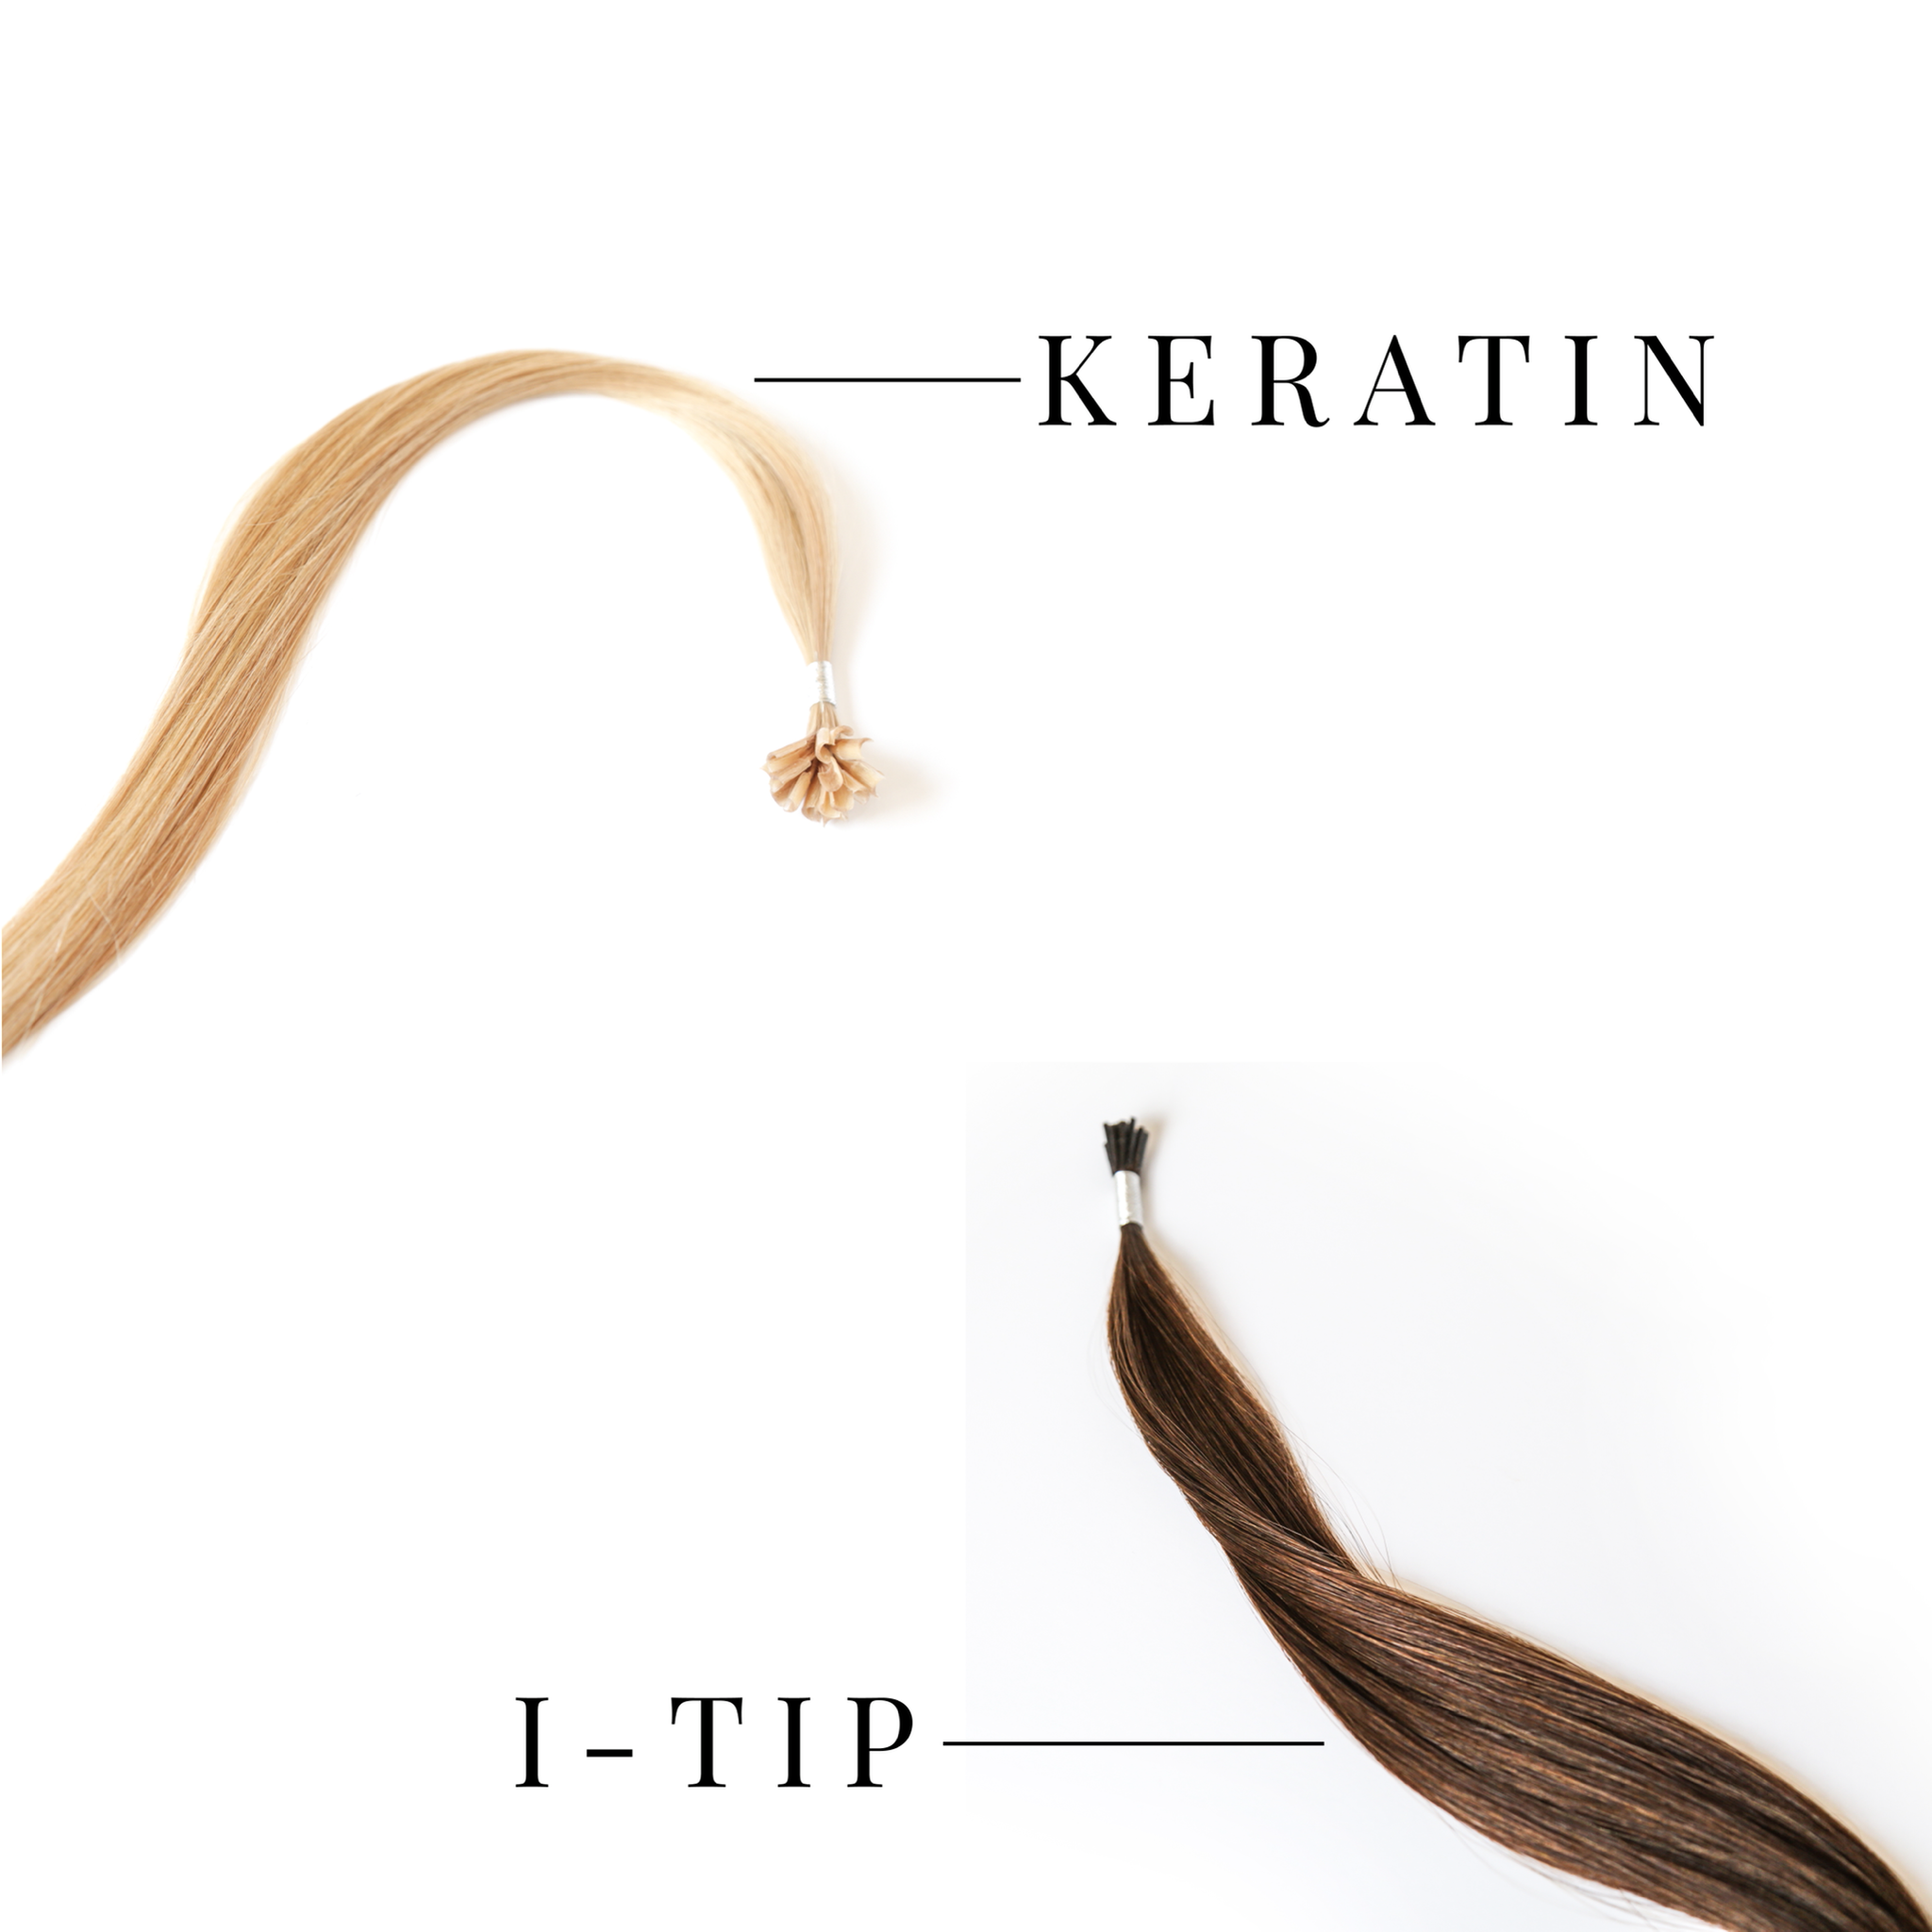 Keratin vs. I-Tip: What are the Differences?